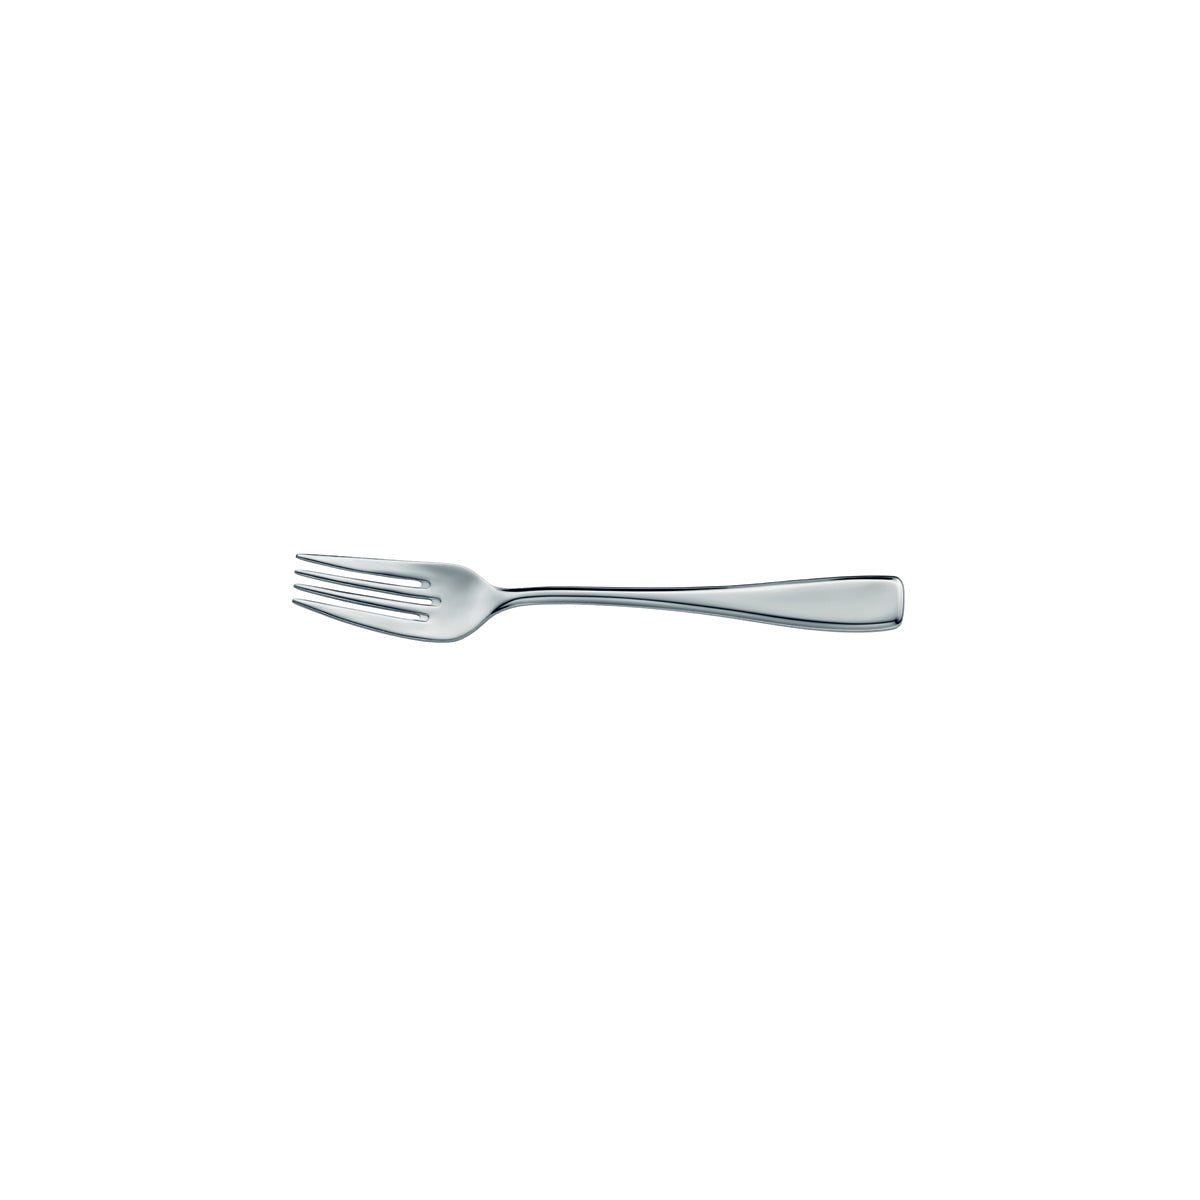 12.7935.6042 WMF Solid Fish Fork Stainless Steel Tomkin Australia Hospitality Supplies